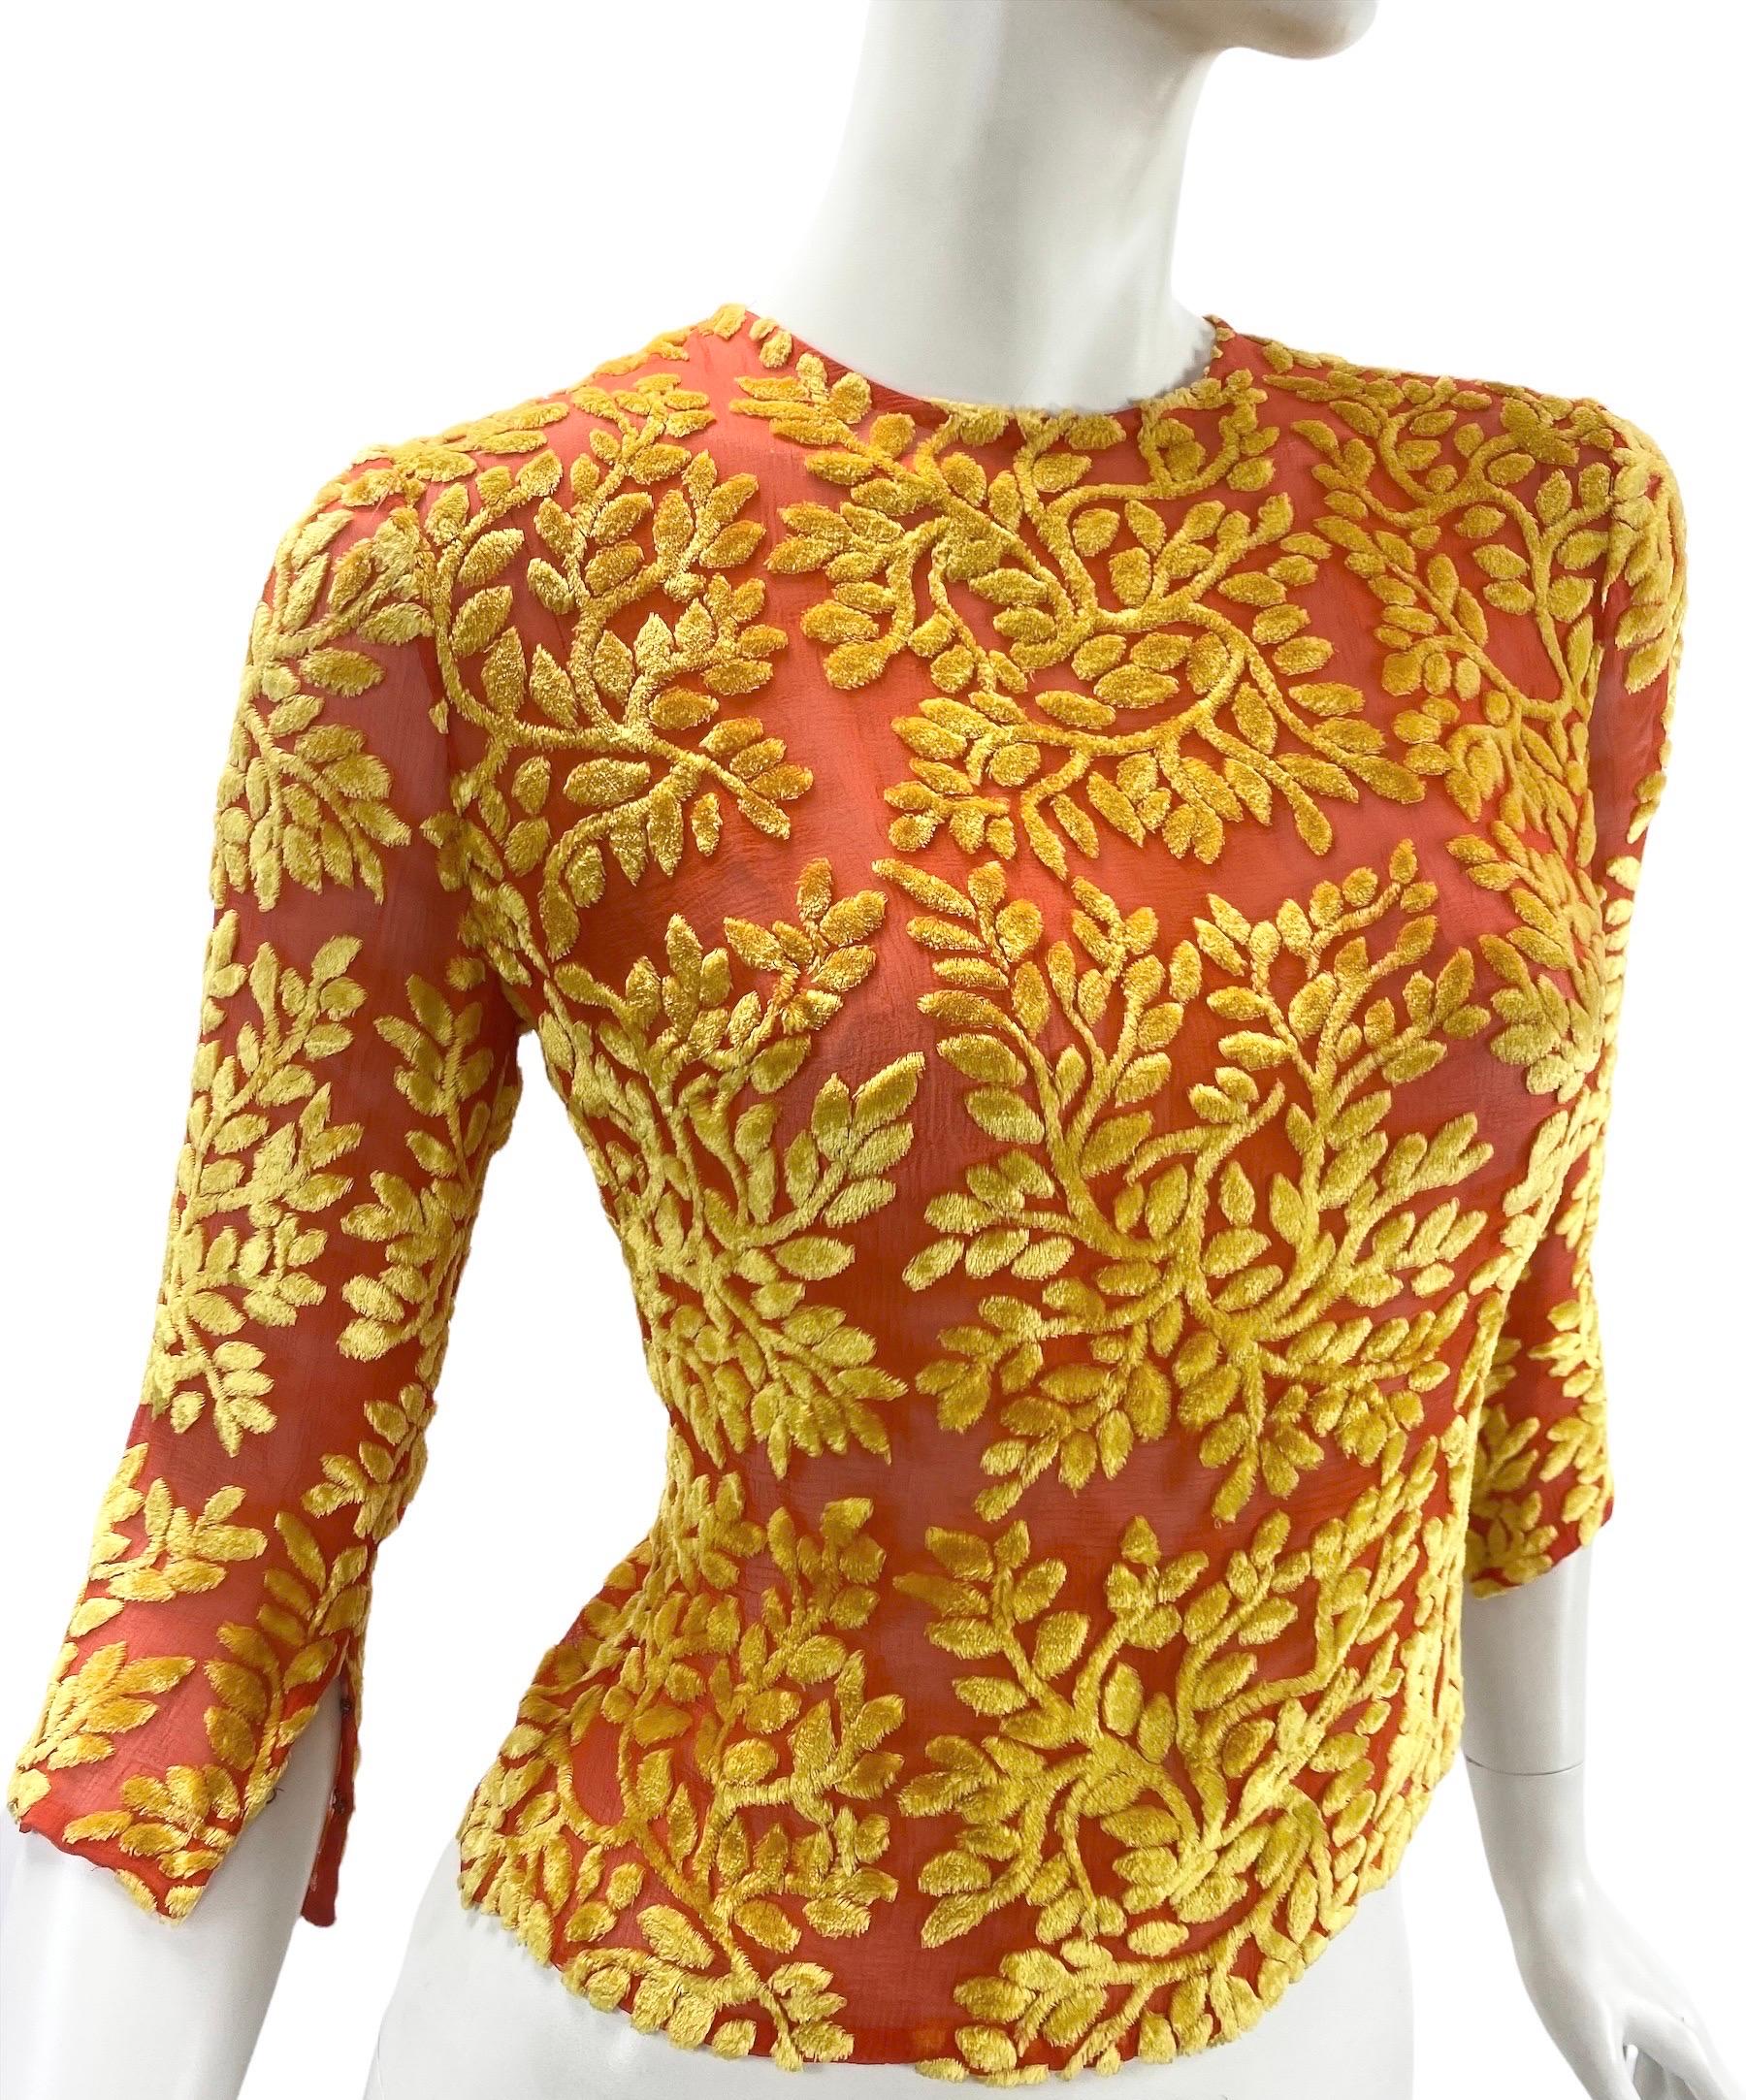 Vintage Gianni Versace Couture Floral Devore Velvet Shirt
1997 Collection
Italian size 40 - US 4
Orange silk chiffon with yellow velvet, Side zip, 3/4 Sleeves.
Measurements: Bust 34 inches, sleeve 16